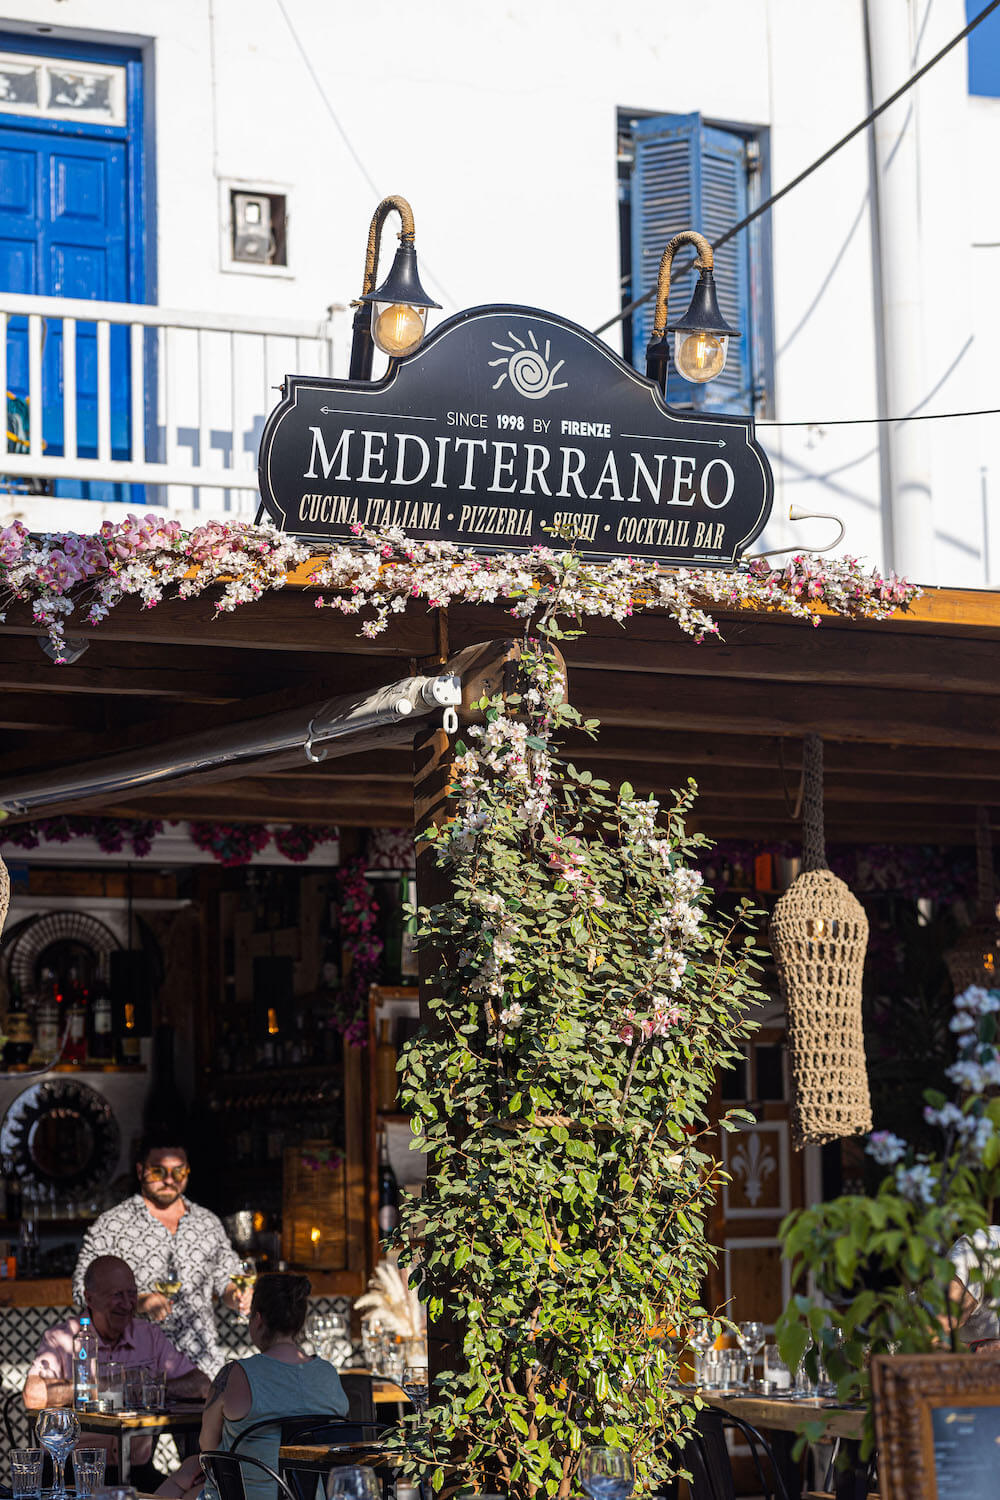 and after having read our essential tips, you must come to eat at Mykonos Mediterraneo